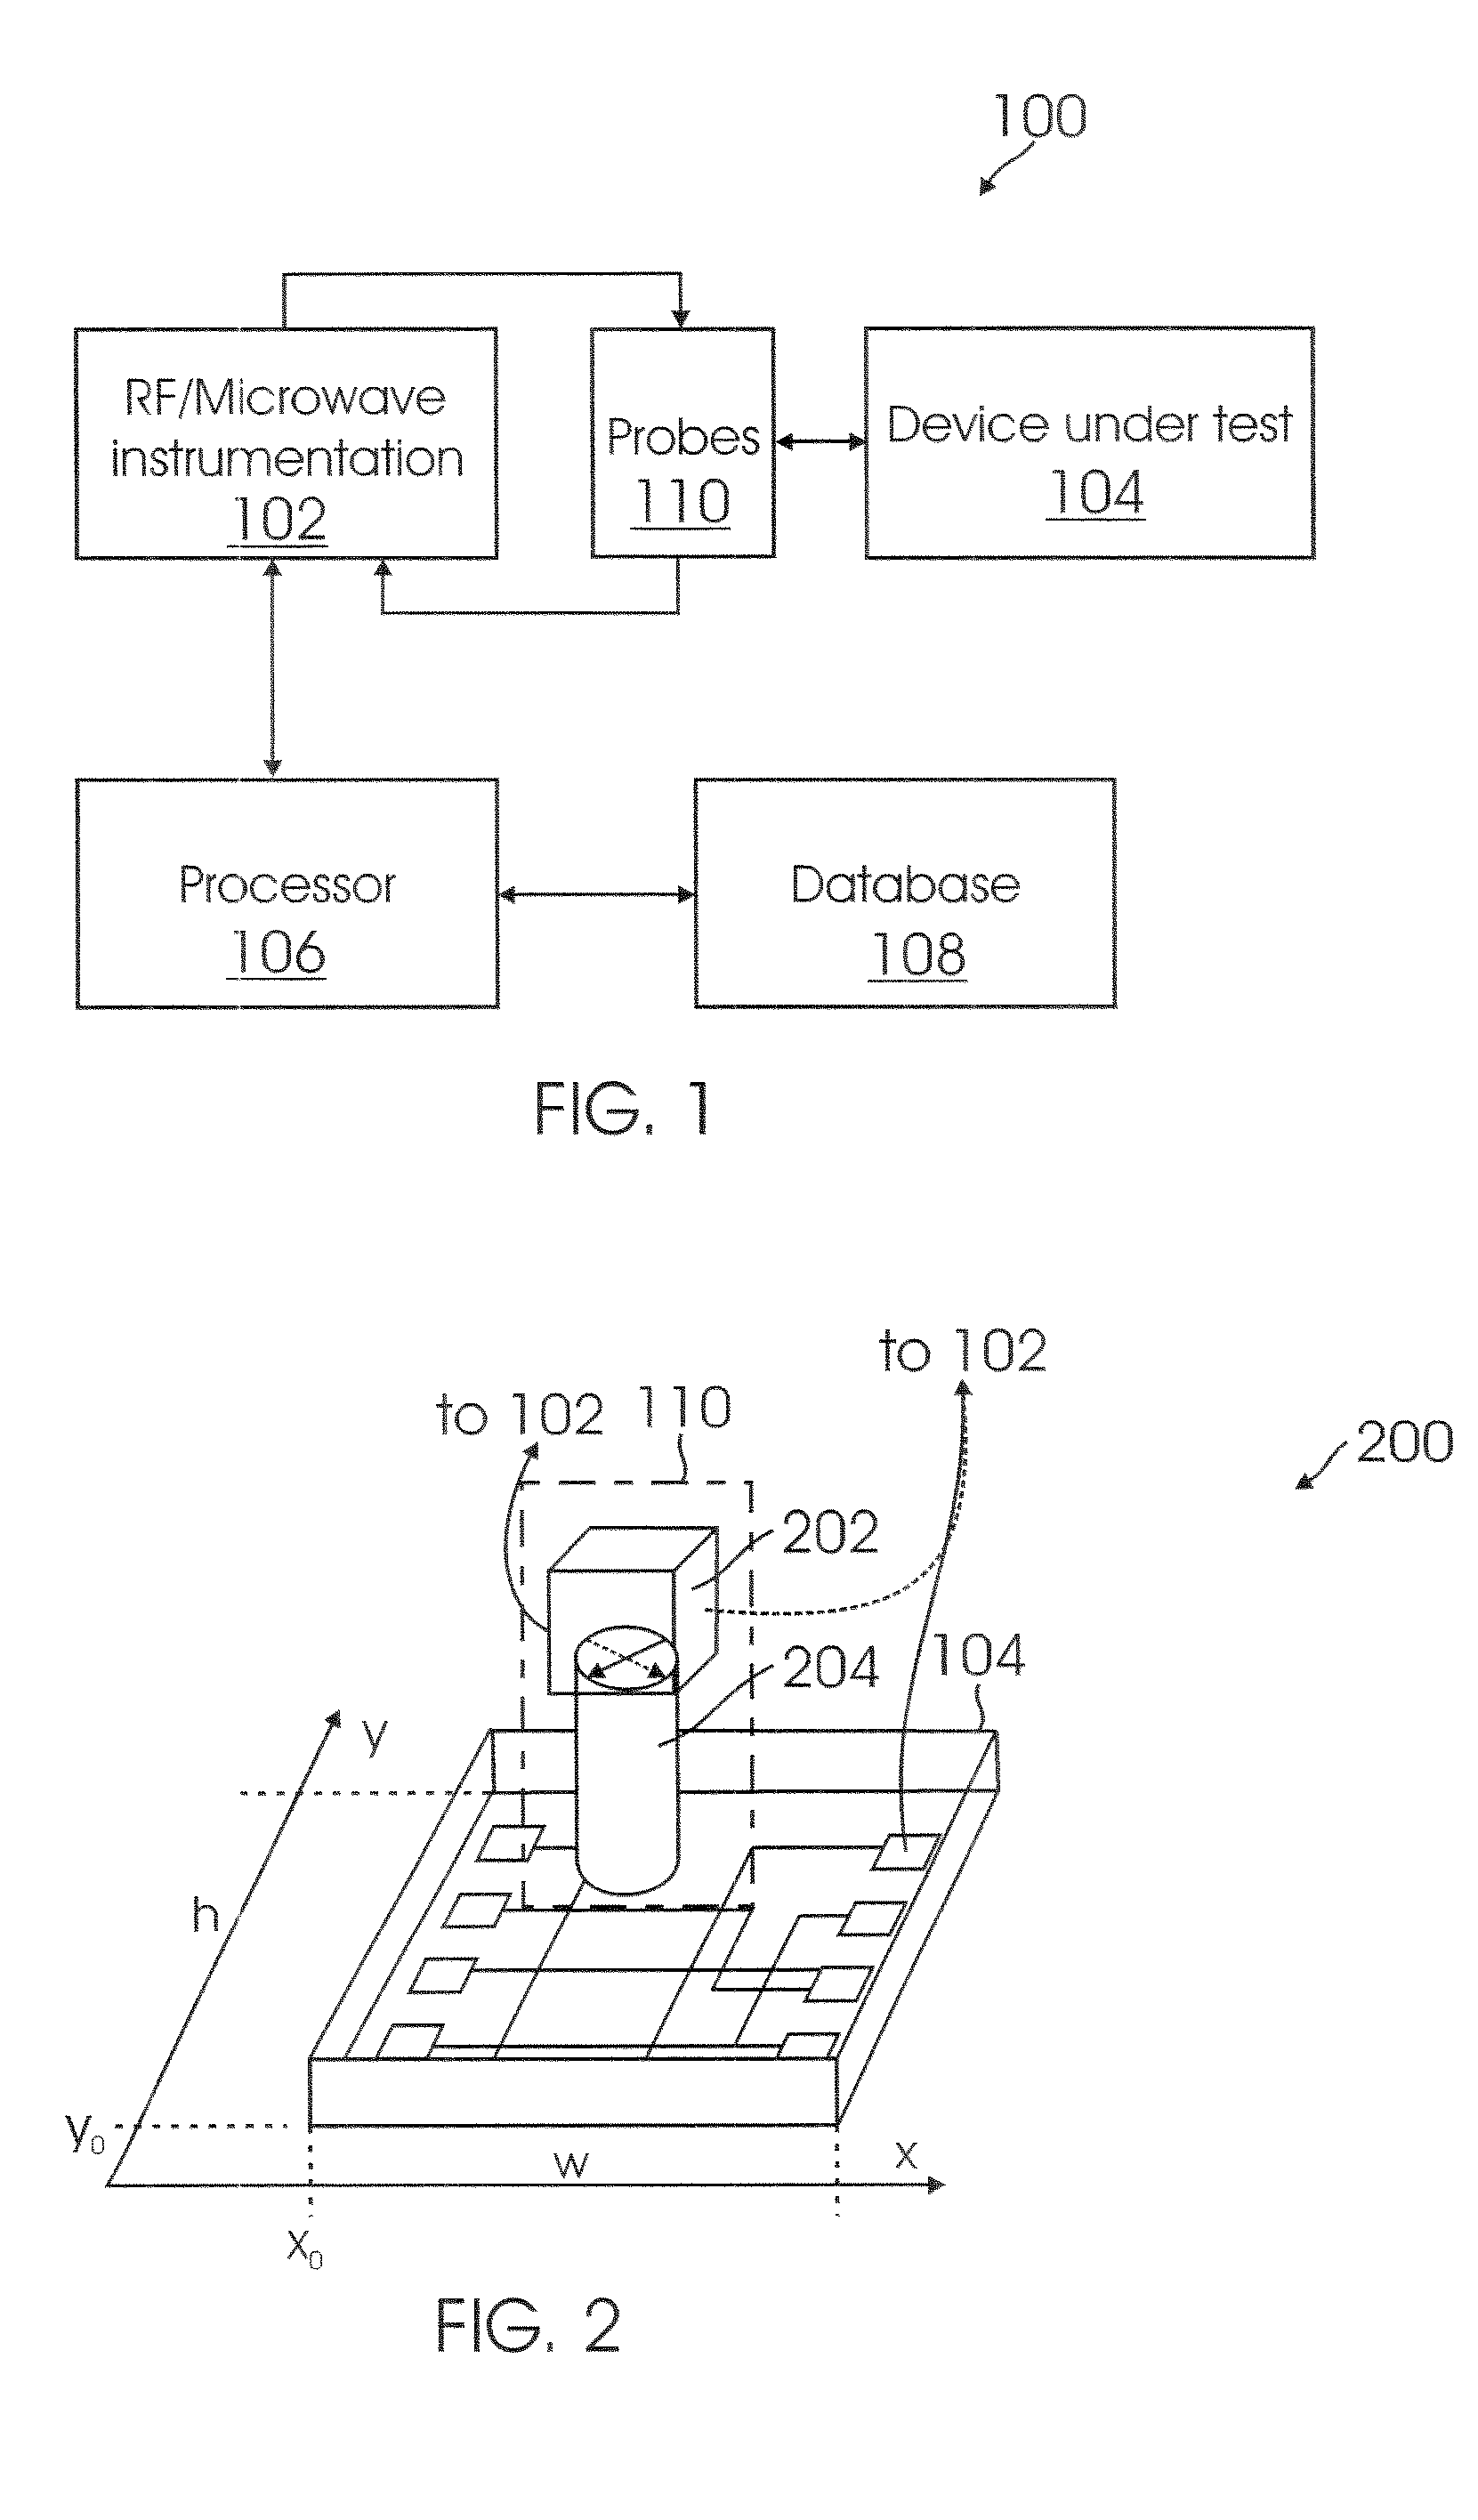 Method for characterizing integrated circuits for identification or security purposes